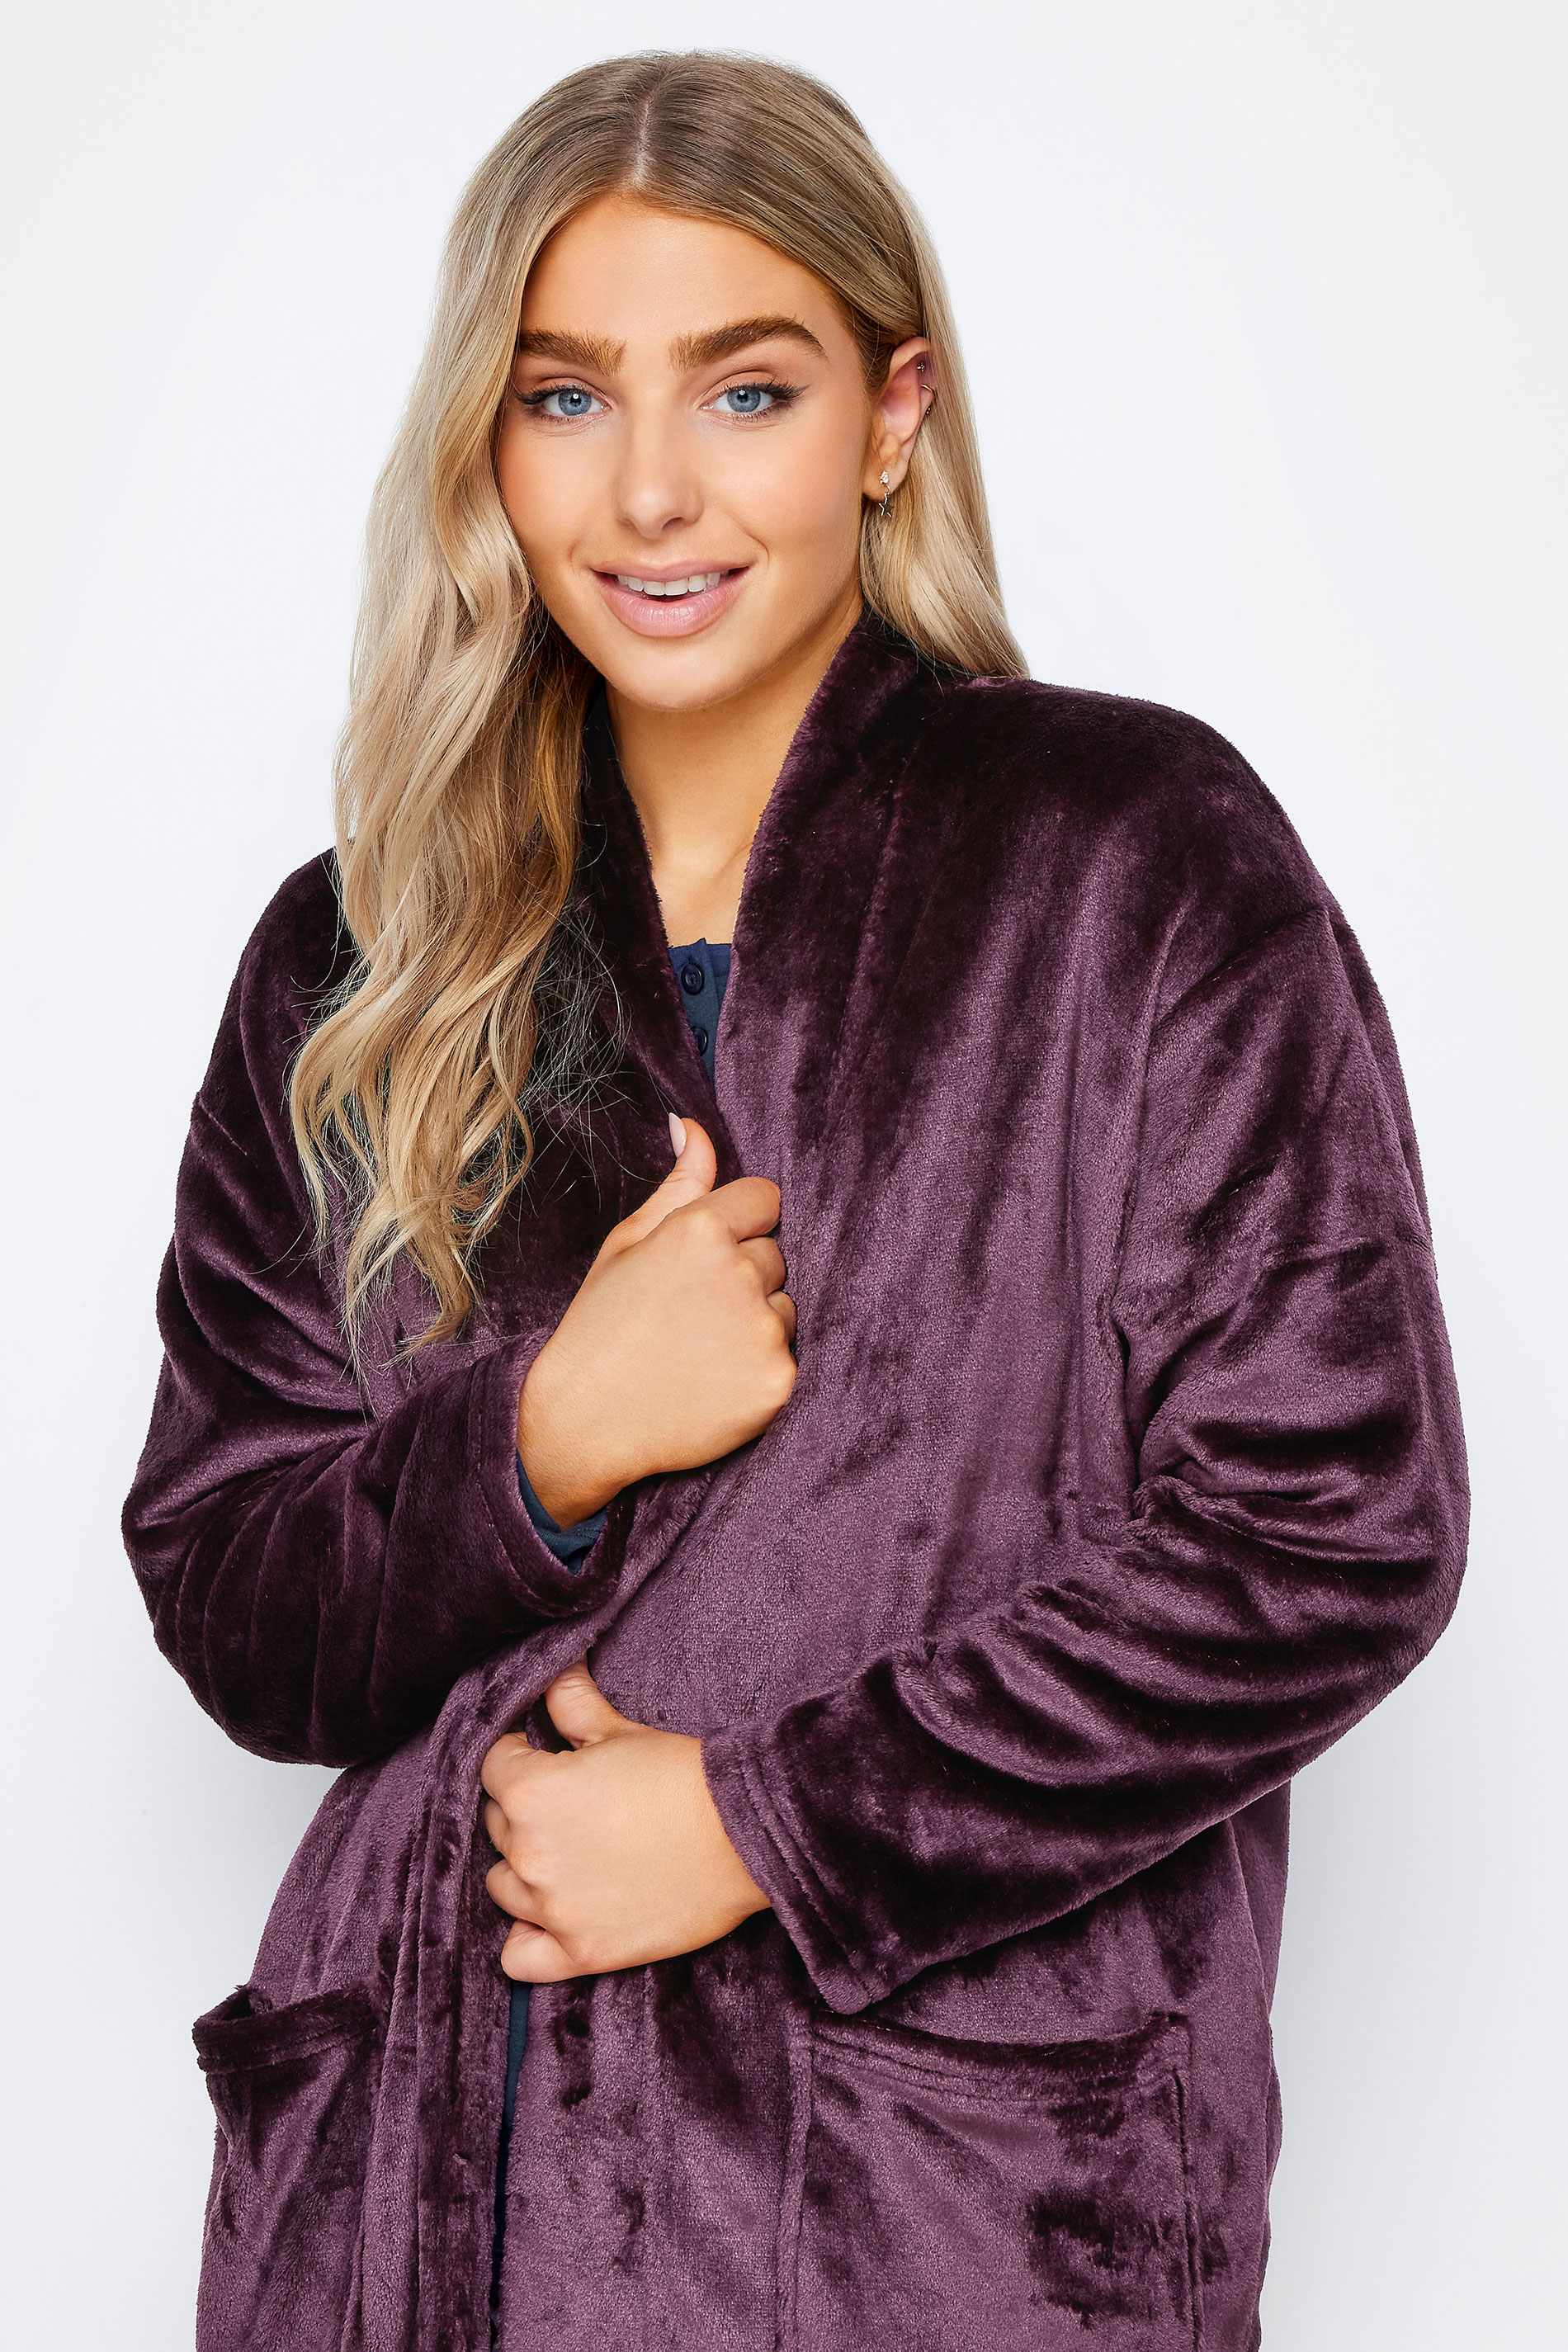 M&Co Burgundy Red Soft Touch Dressing Gown | M&Co 2